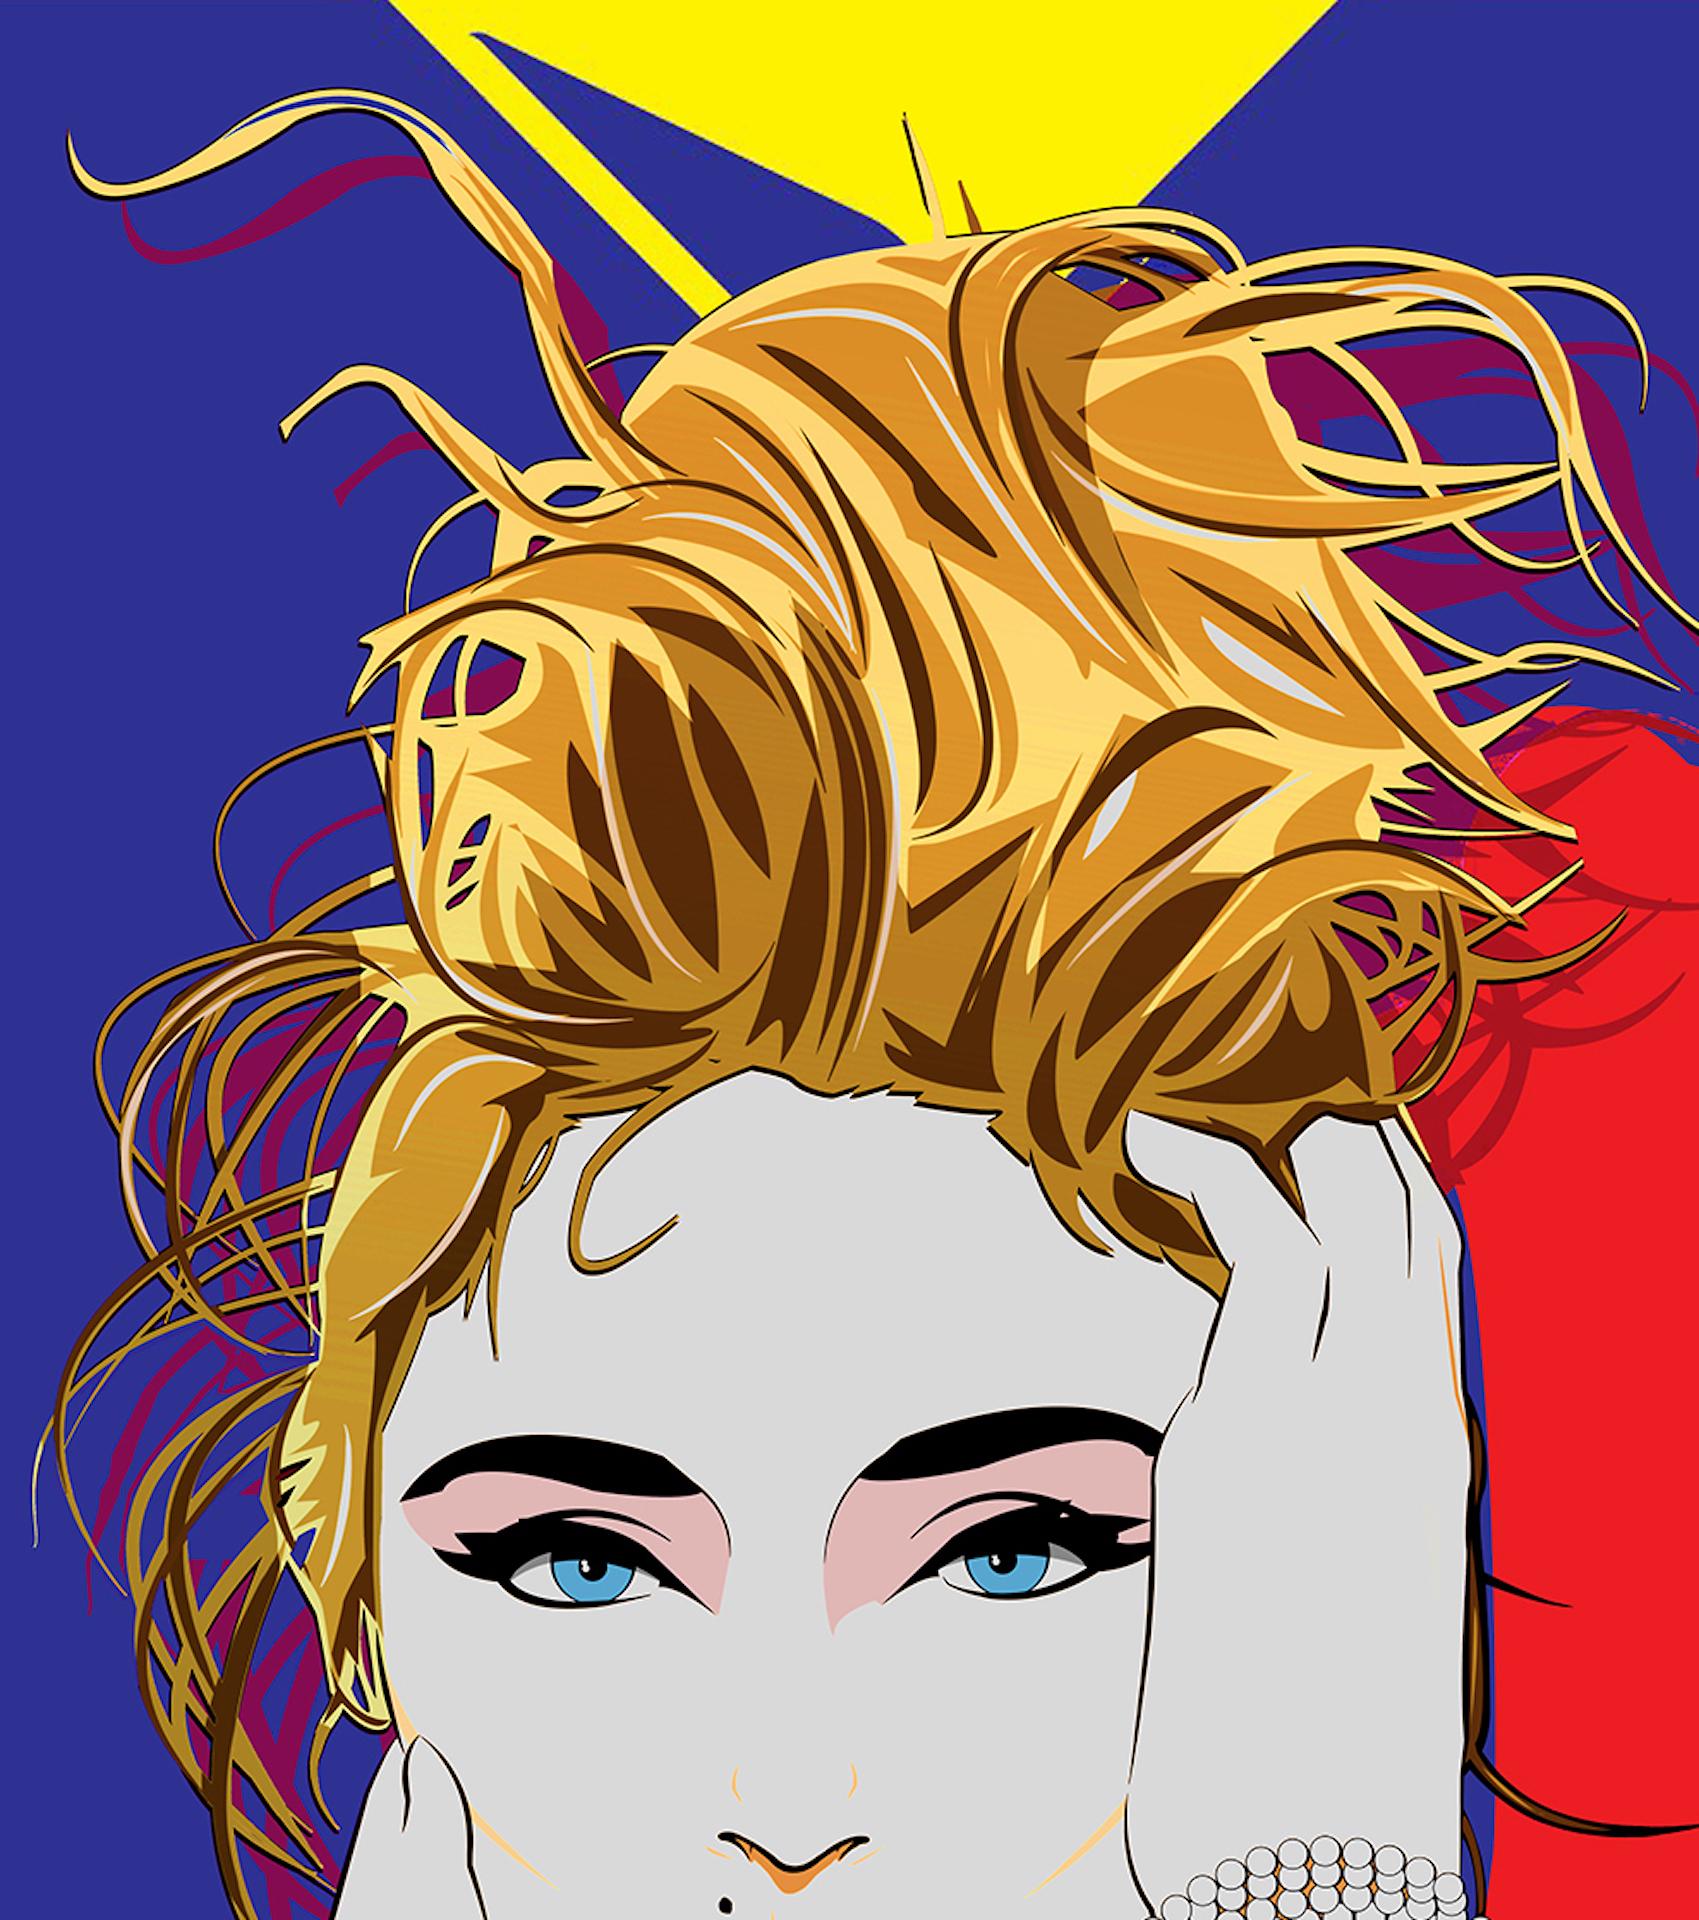 Agent X
MADONNA (TRUE BLUE)
Limited Edition Giclee Print
Edition of 50
Paper Size: 101 cm x 101 cm x 1cm
Sold Unframed
Free Shipping
Please note that in situ images are purely an indication of how a piece may look.

Pop Art for the twenty-first